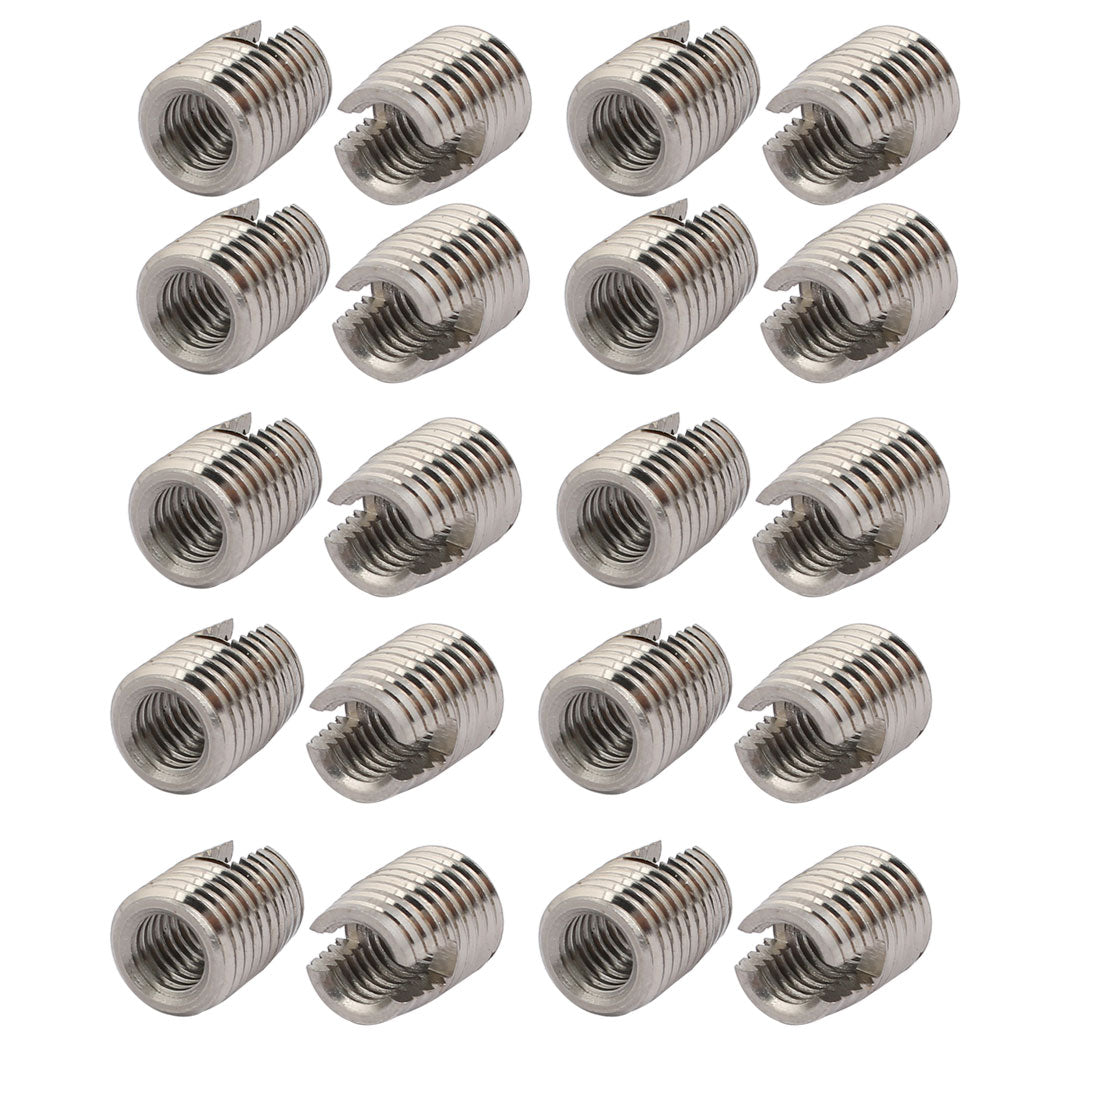 uxcell Uxcell M8x15mm 304 Stainless Steel Self Tapping Slotted Thread Insert 20pcs